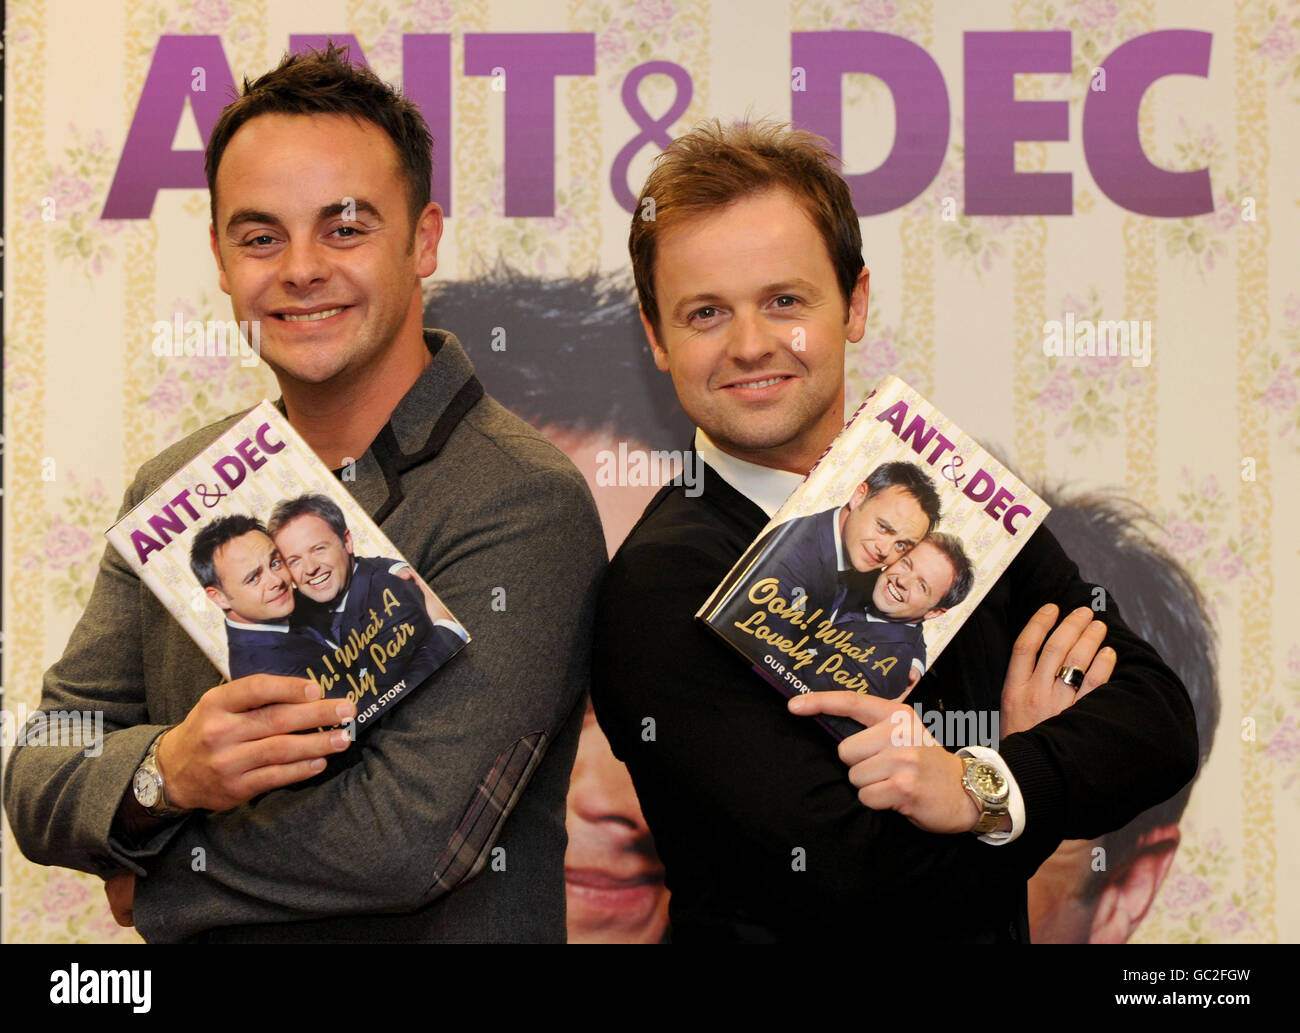 Ant and Dec autobiography launch. Ant and Dec at the launch of their autobiography 'Ooh What A Lovely Pair' at Waterstones in Newcastle. Stock Photo